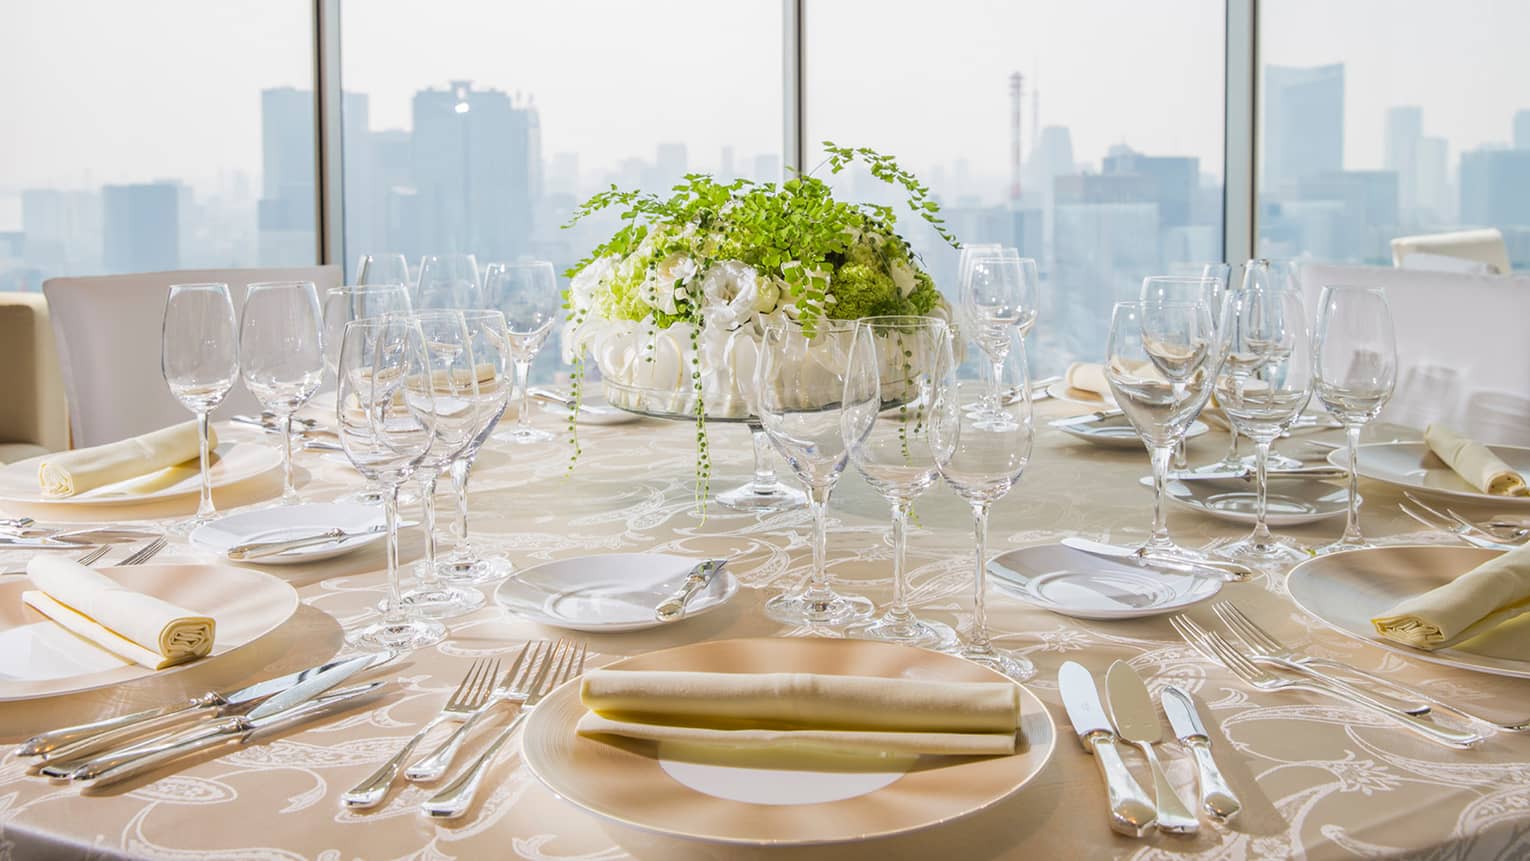 Table setting, rolled napkins on plates, glassware and floral arrangement on table by window